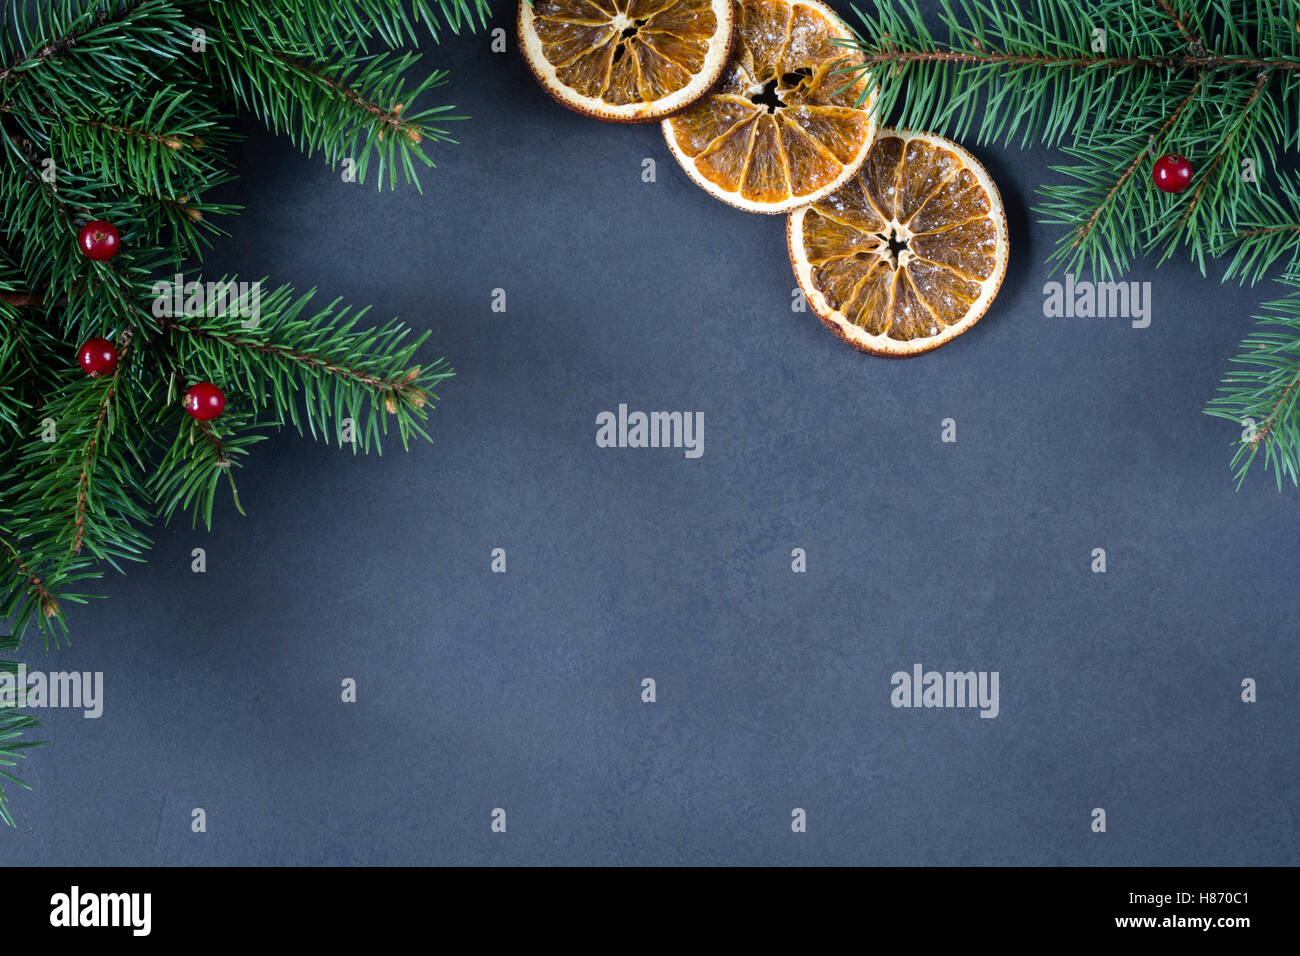 Background for Christmas or New Year: fir tree, cranberries and dry oranges over dark background. Copy space for text. Mock up Stock Photo